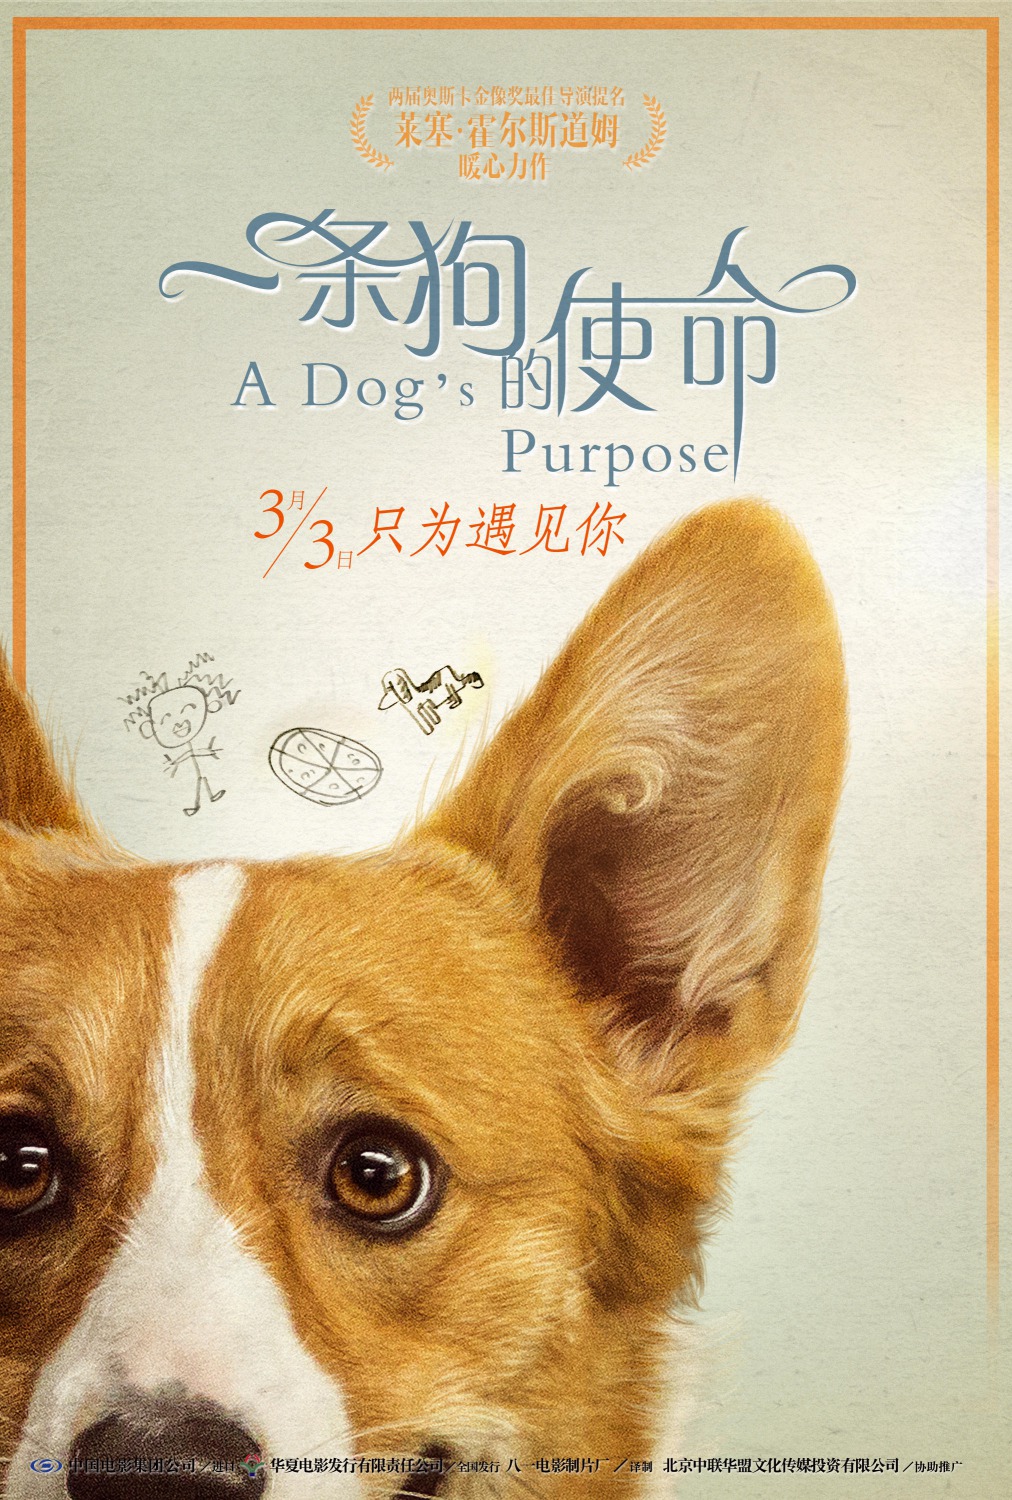 Extra Large Movie Poster Image for A Dog's Purpose (#8 of 13)